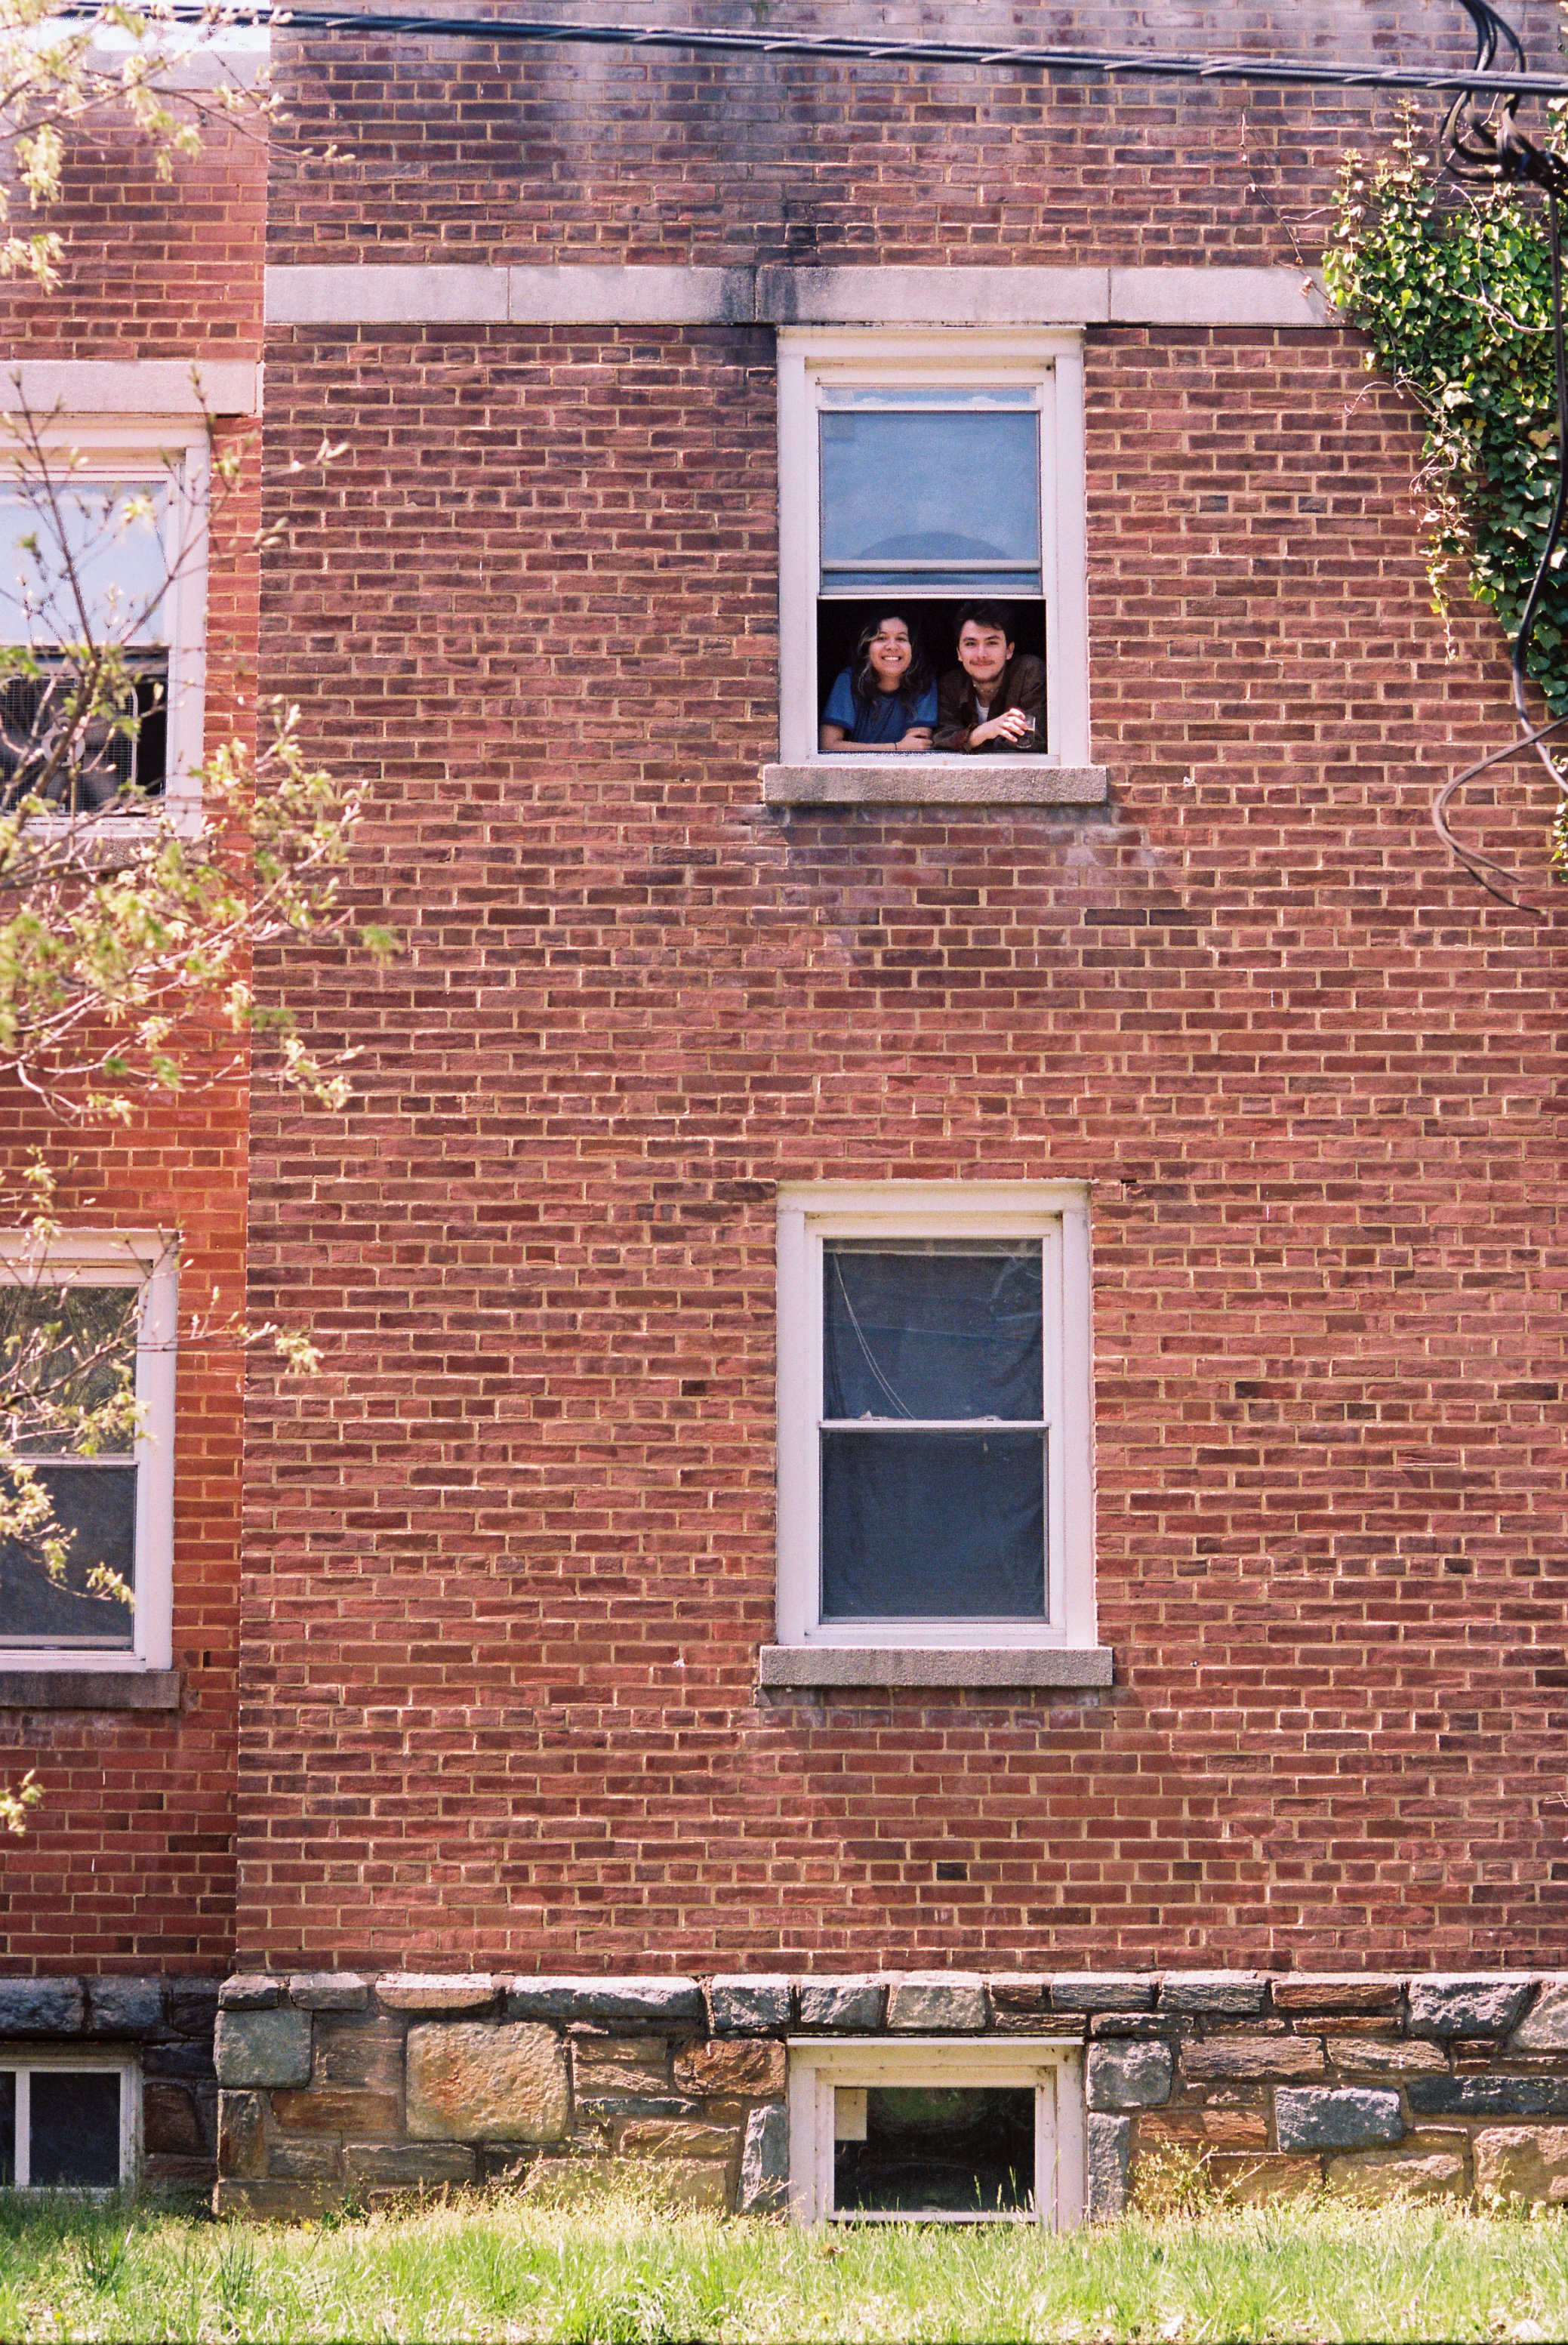 Sebastian and Salome Out of Window Glover Park DC Canon F1 Film.jpg